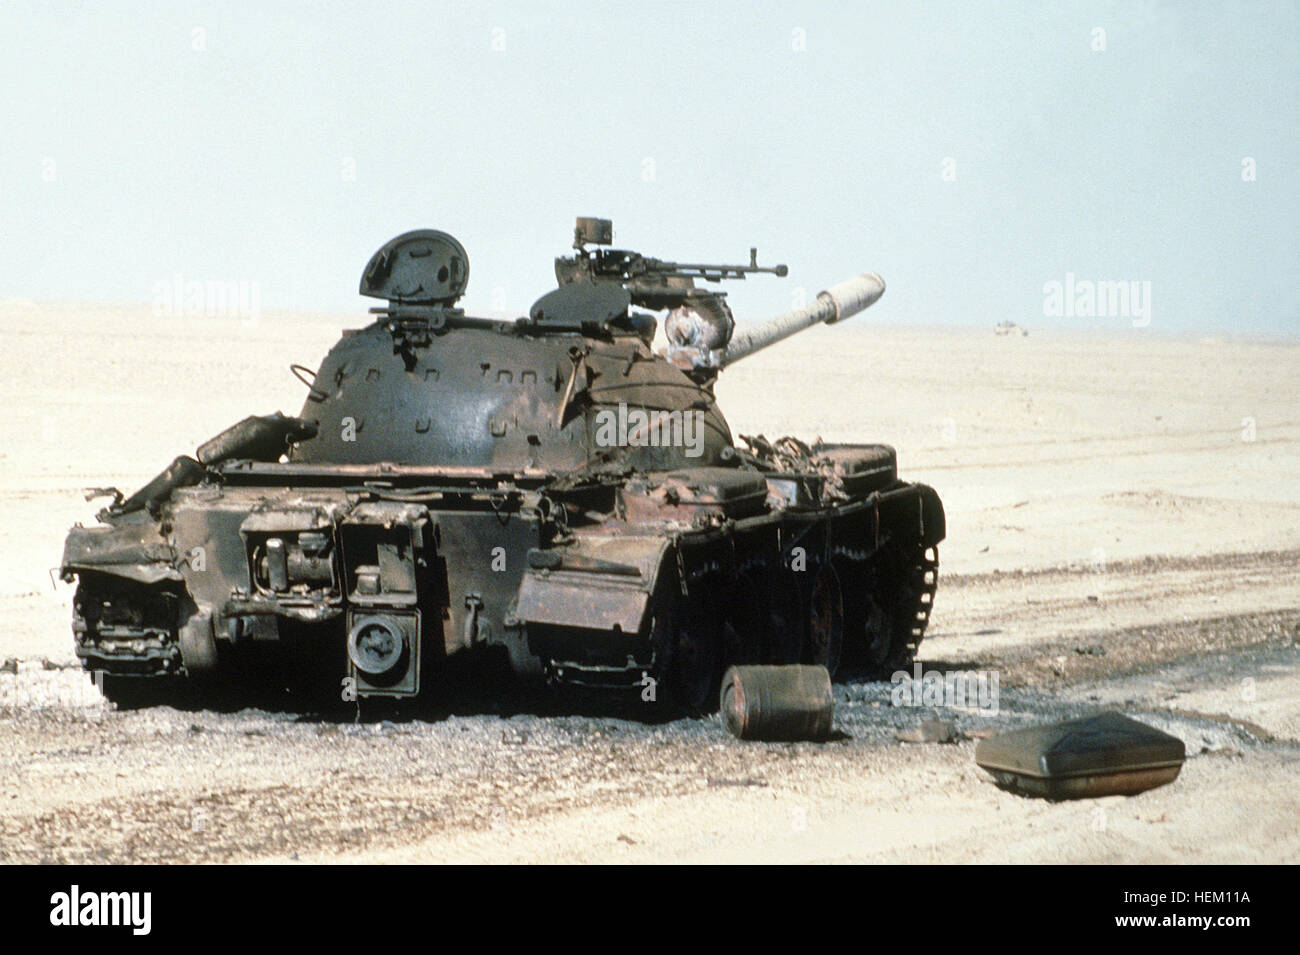 A demolished Iraqi T-55 battle tank stands on a battlefield after being destroyed by Allied forces during Operation Desert Storm. Disabled Iraqi Type 69 Stock Photo - Alamy